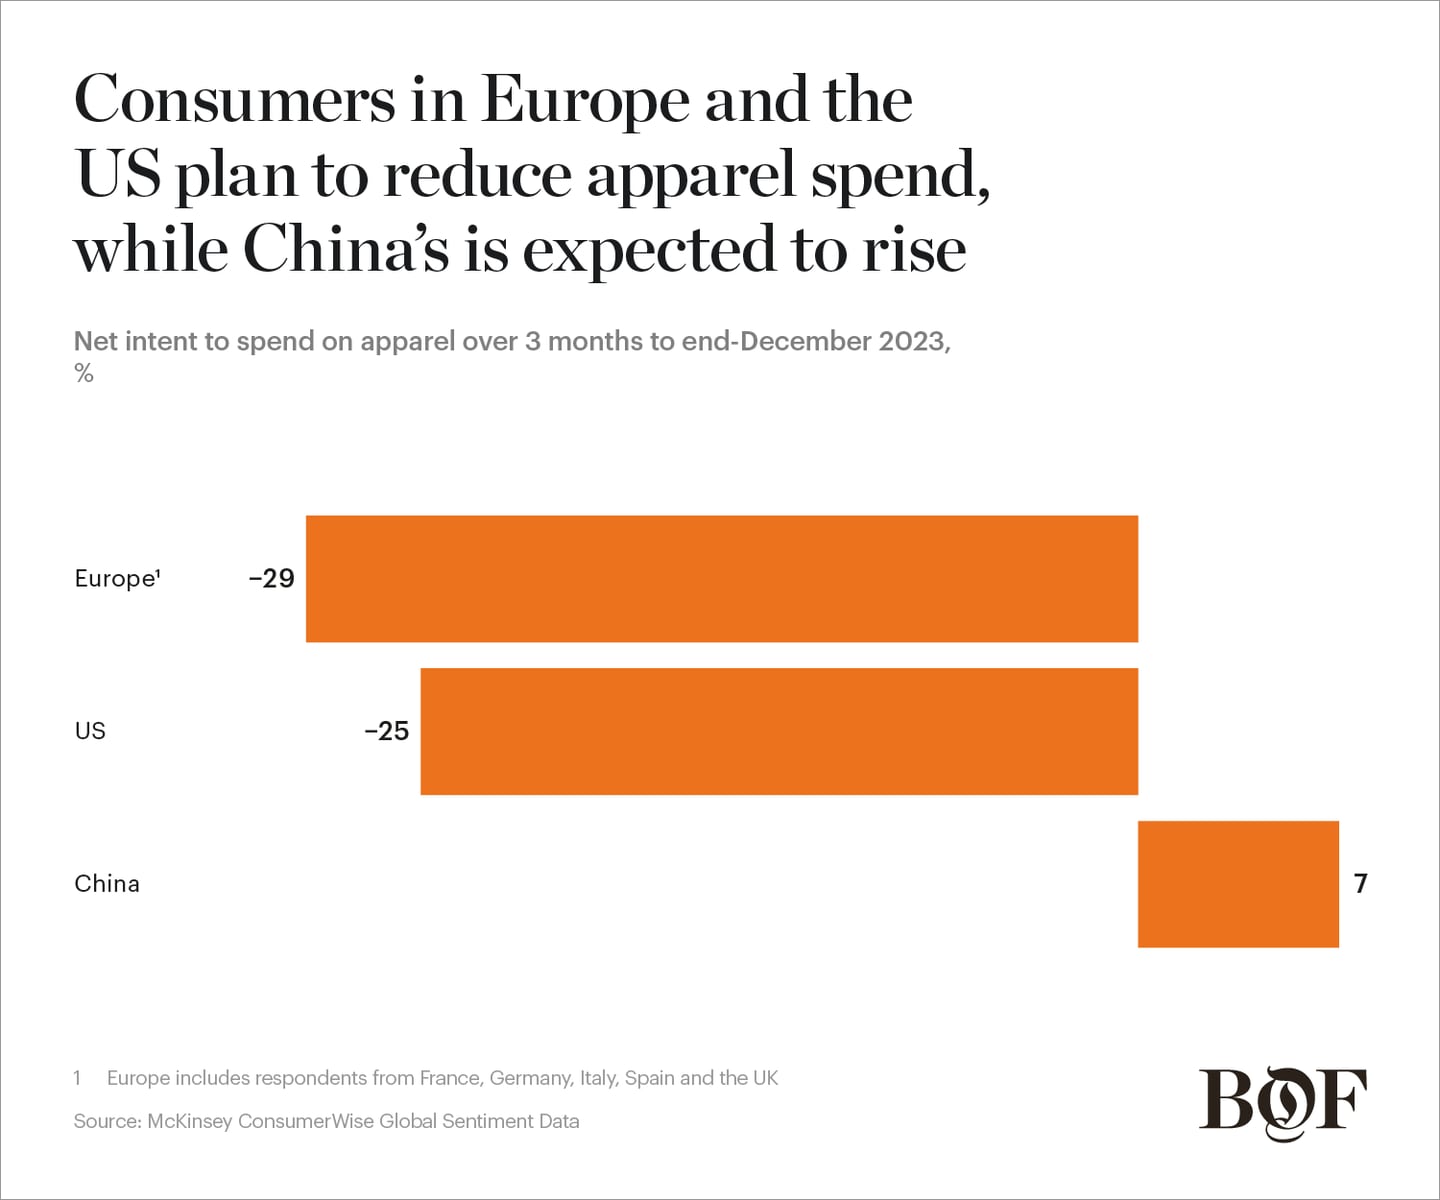 Bar chart showing consumers in Europe and the US plan to reduce apparel spend, while China’s is expected to rise